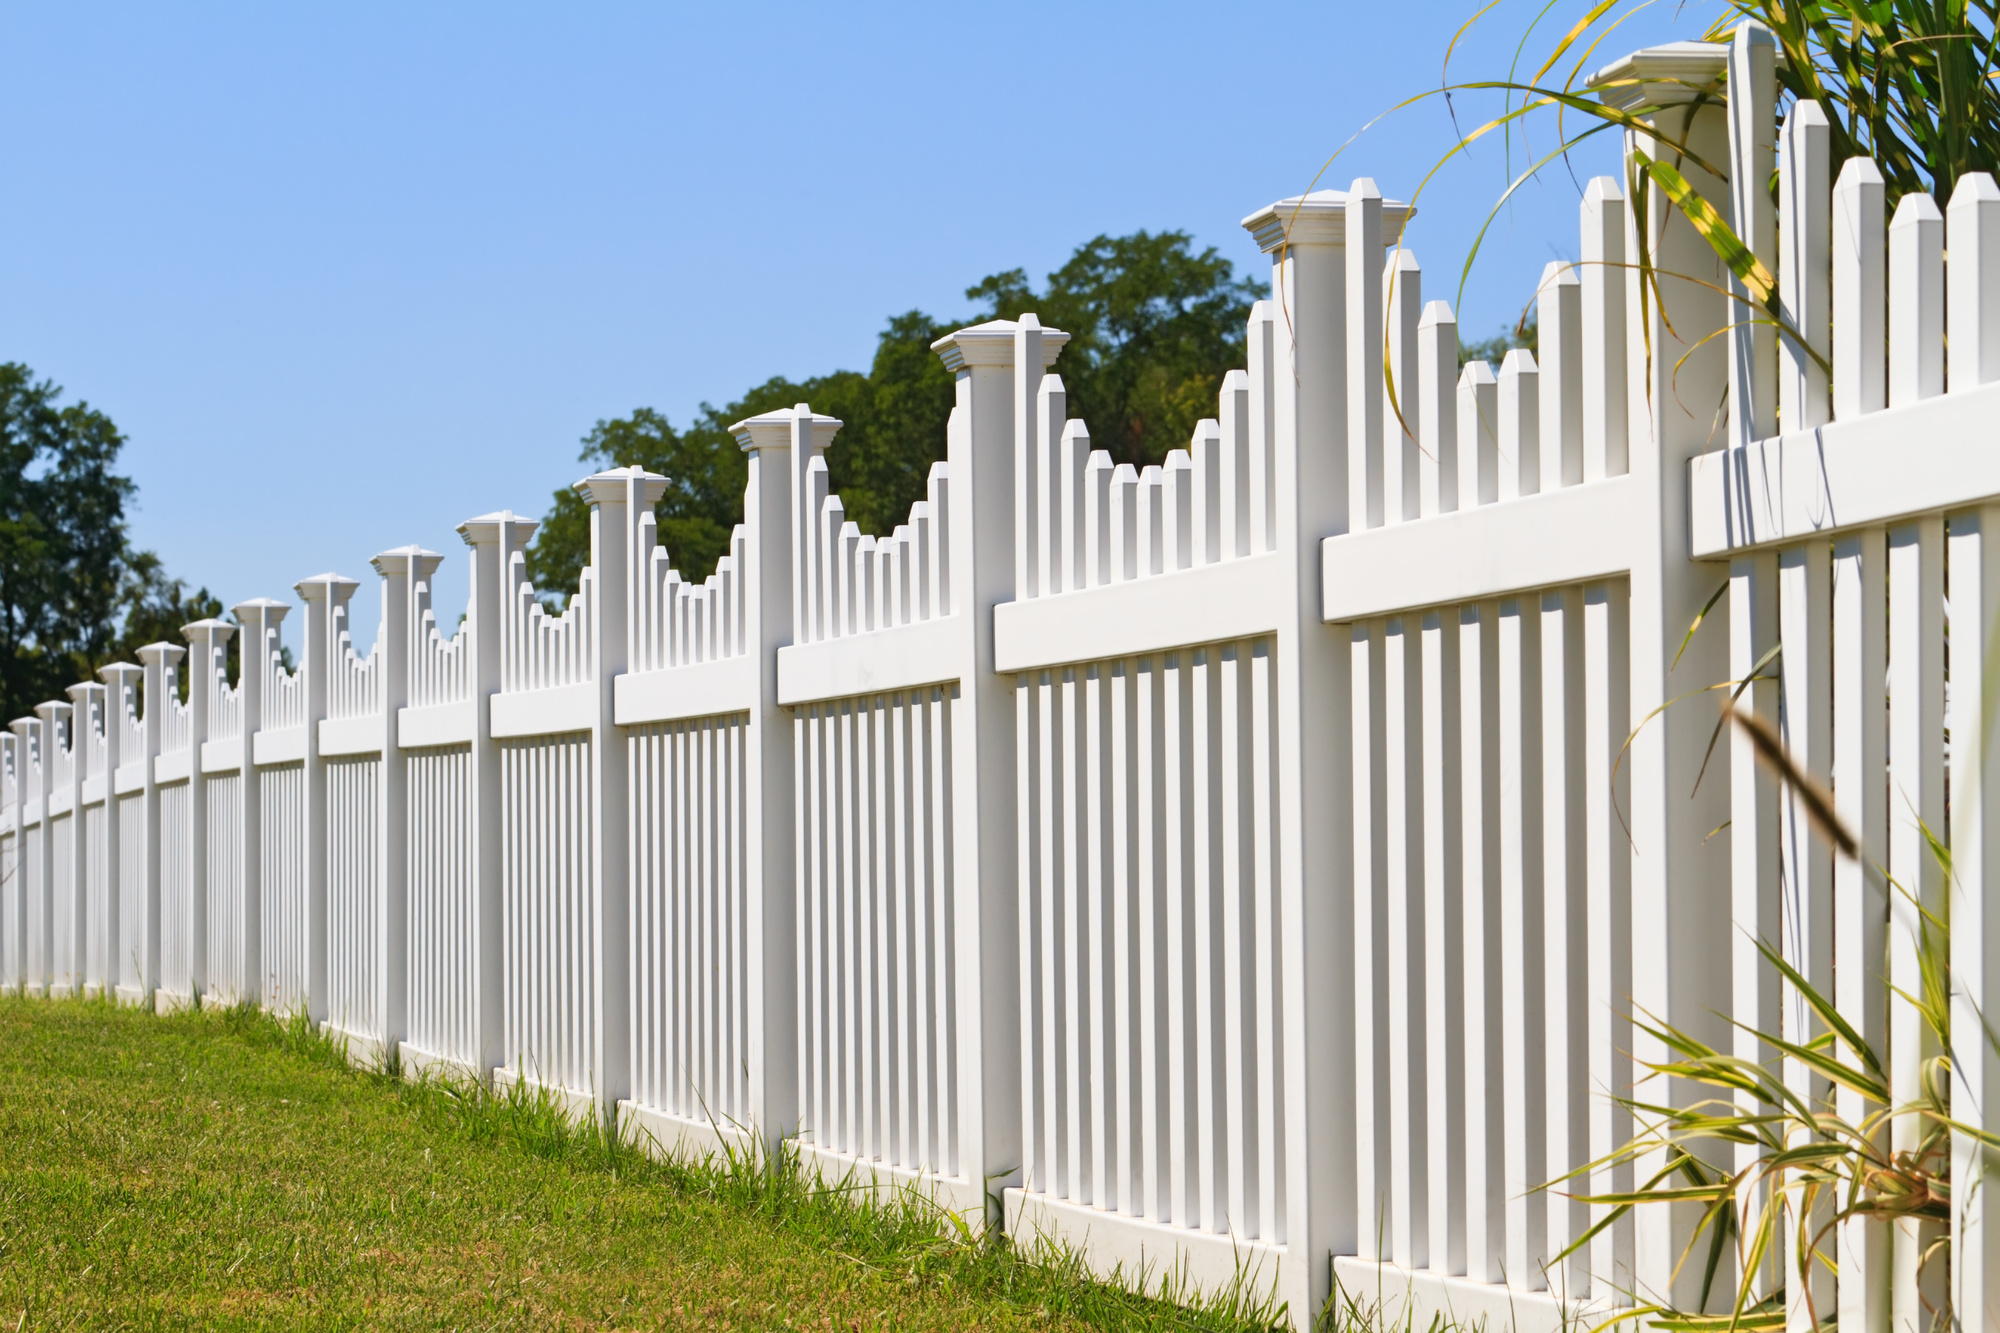 Vinyl fencing is famously one of the easiest fencing materials to clean, but that doesn't mean you should neglect it. Check out these 7 fence maintenance tips.